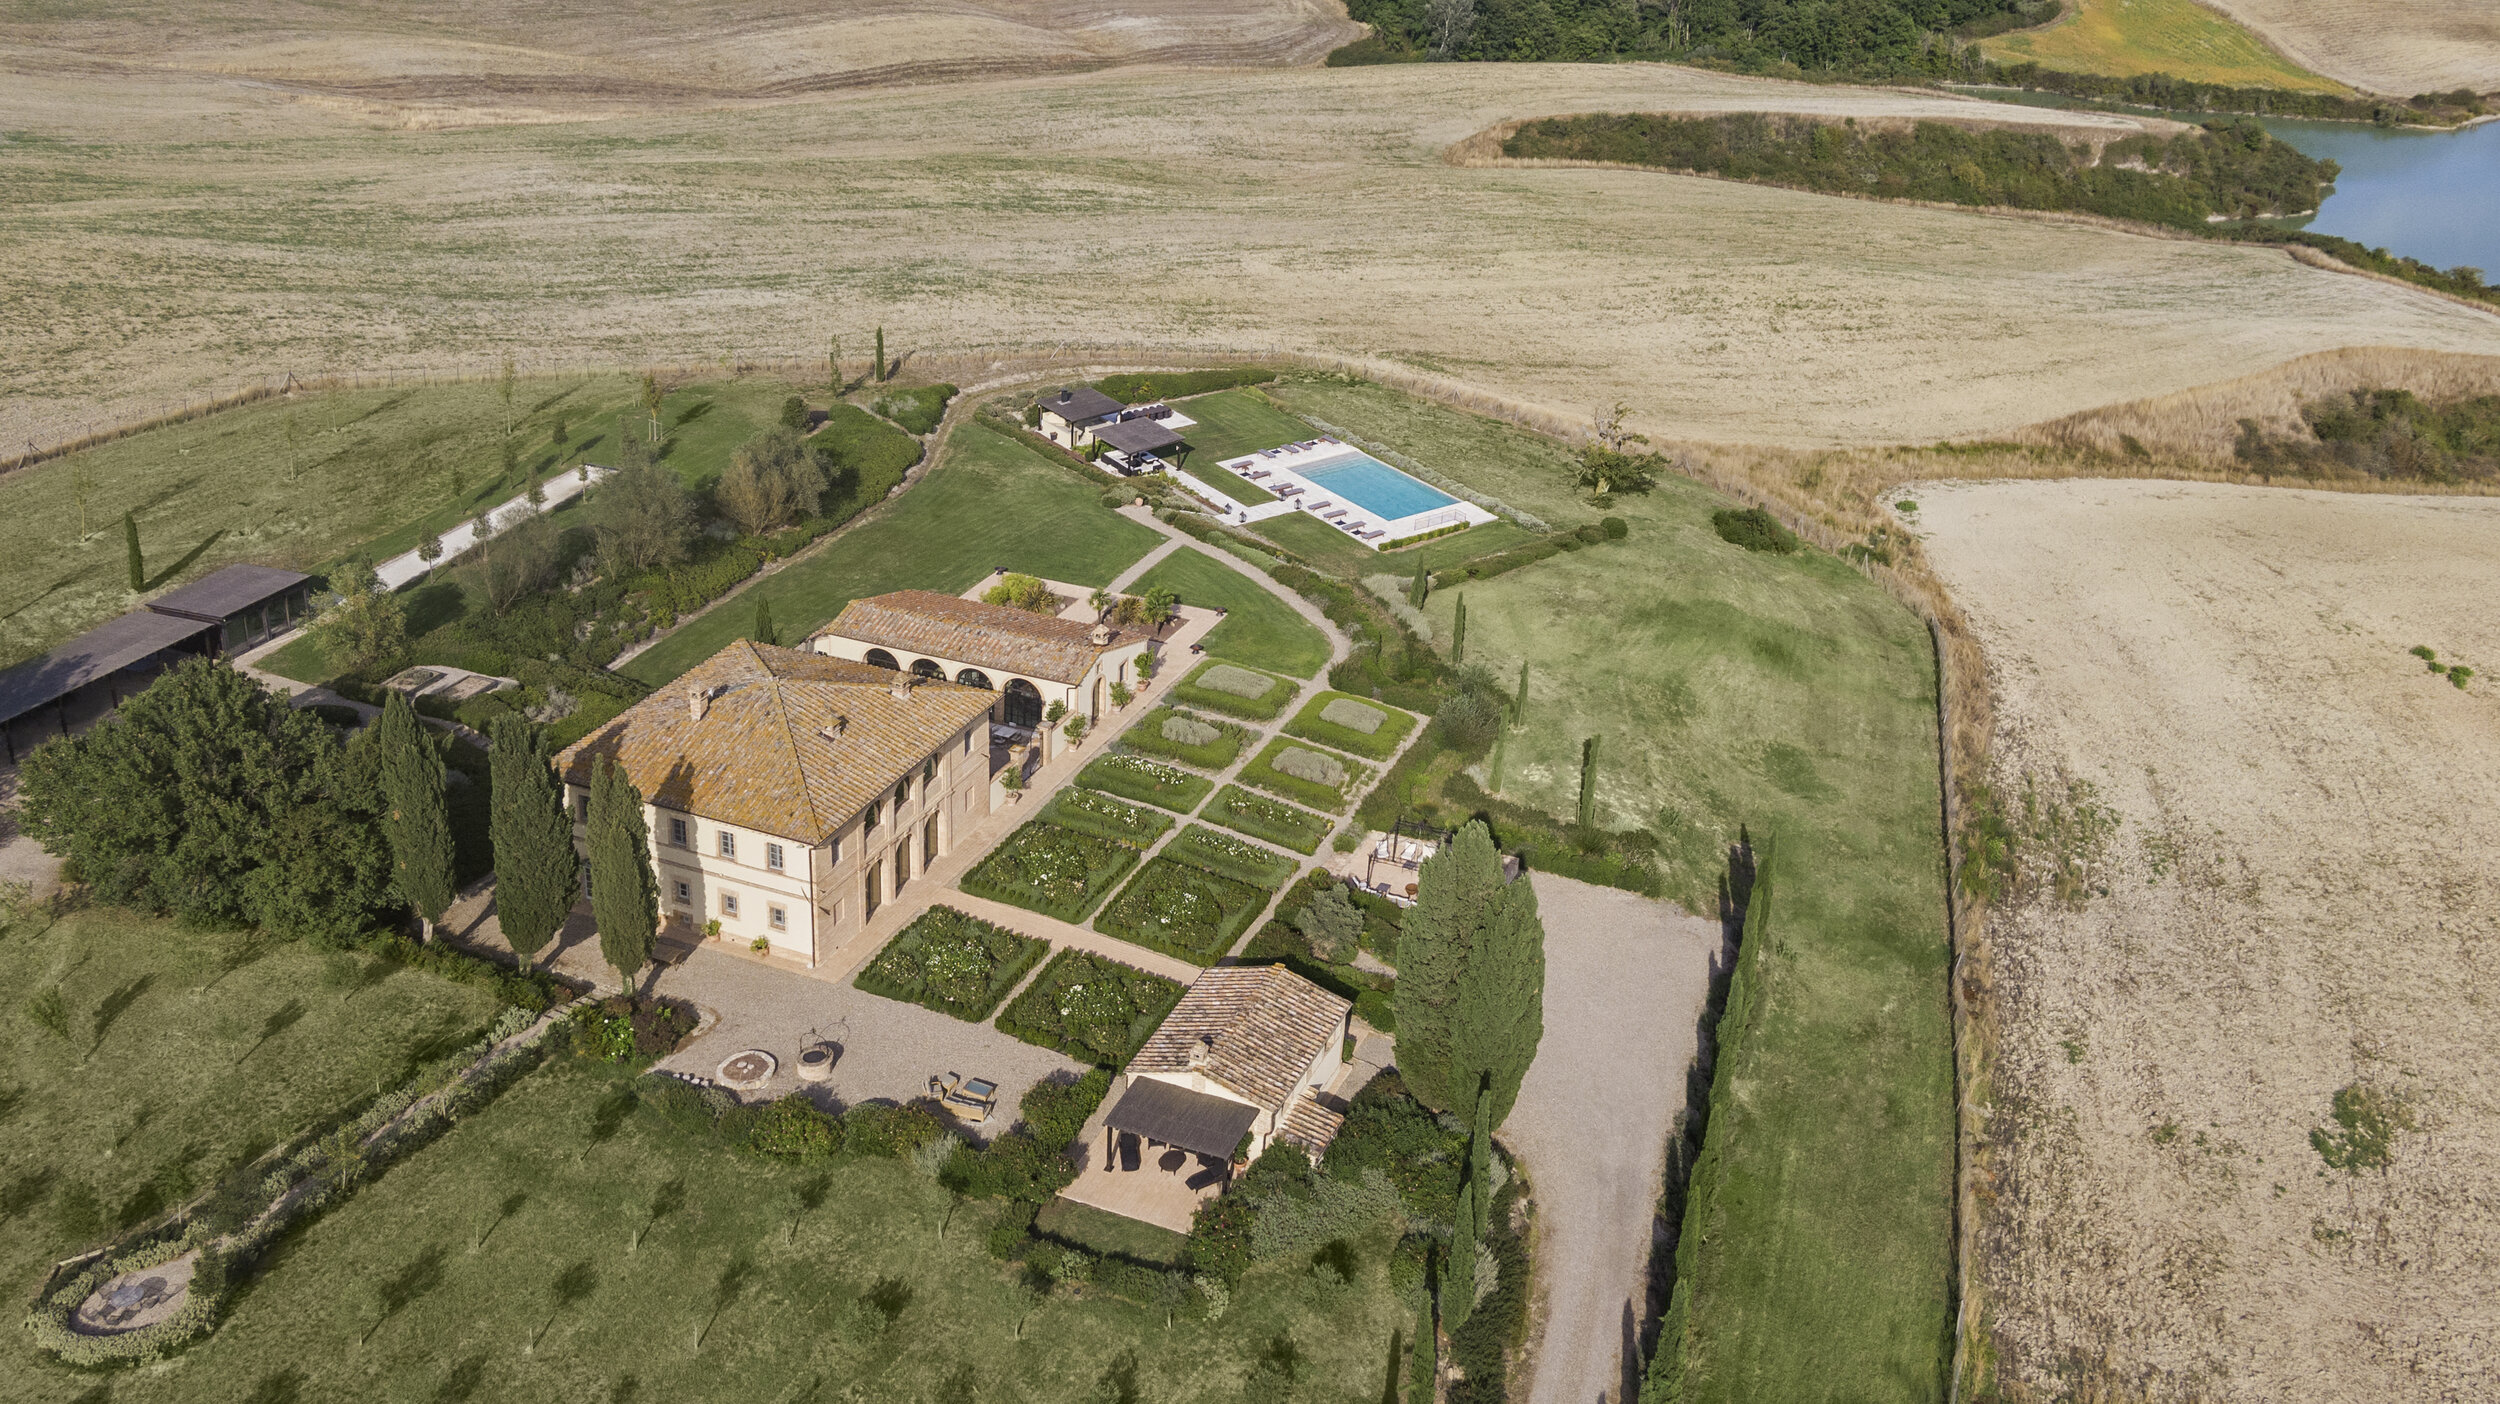 Francis York Contemporary Villa and Compound in Tuscany 5.jpg